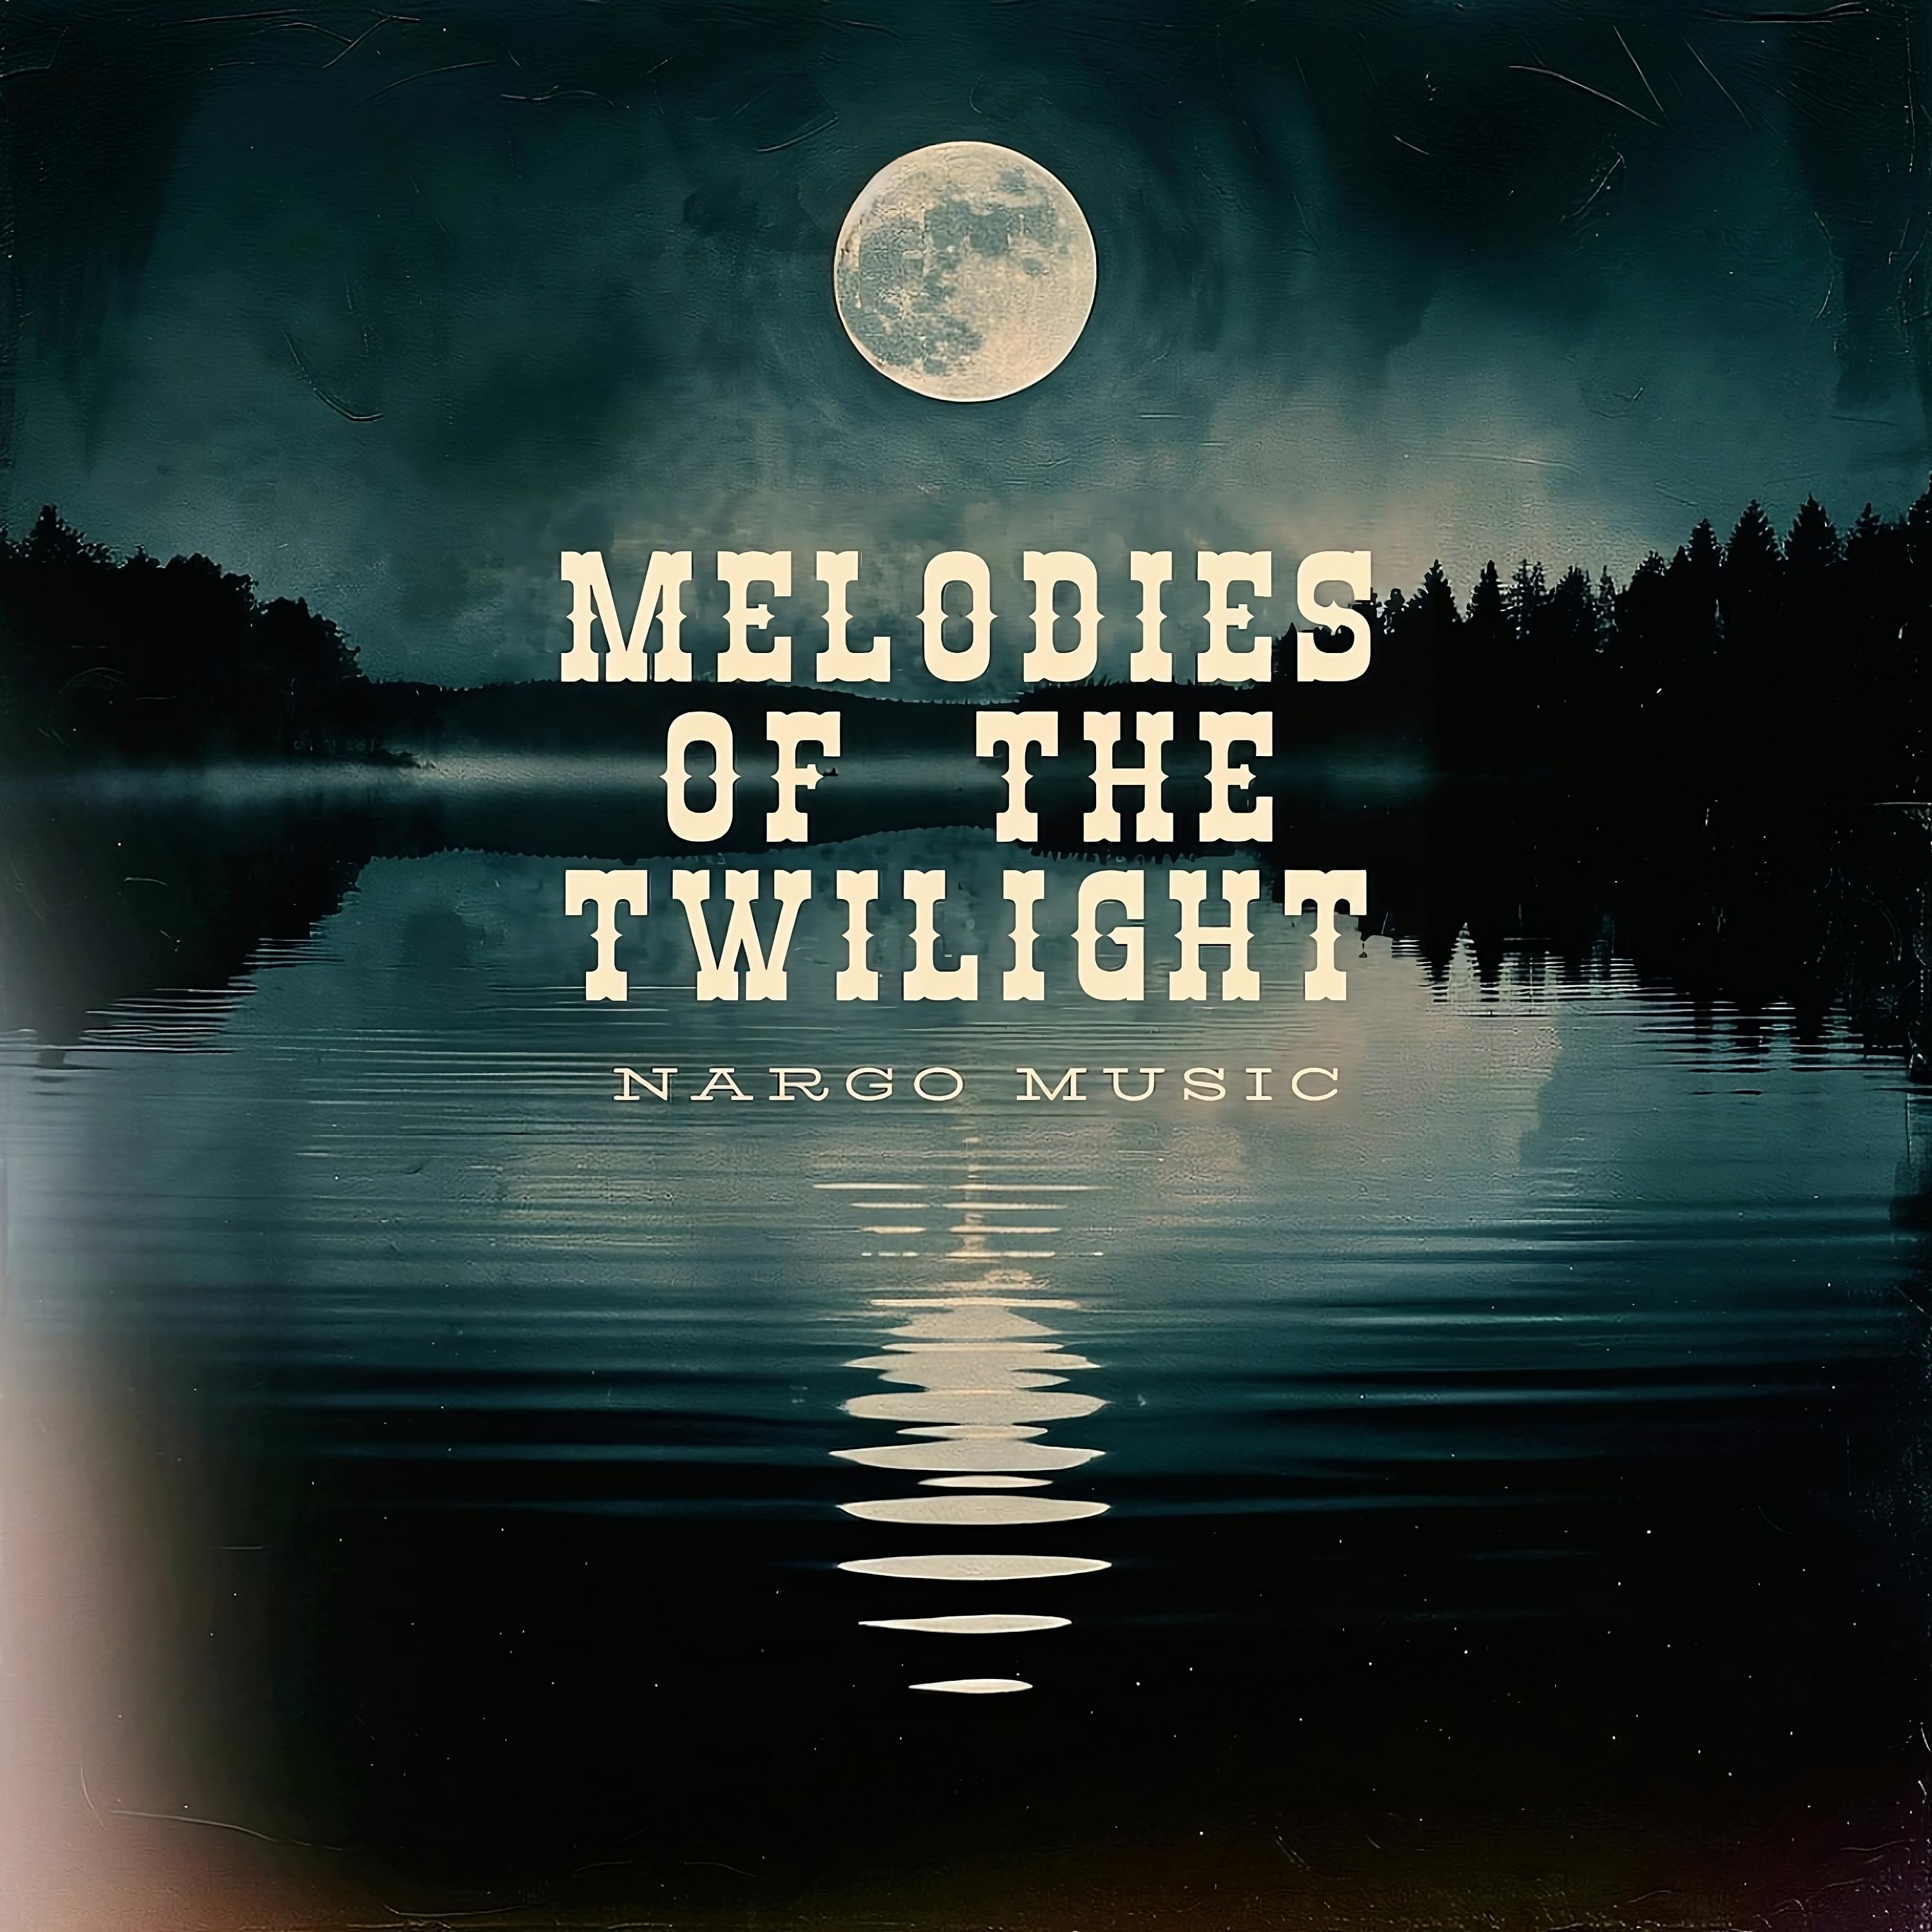 Melodies of the Twilight.